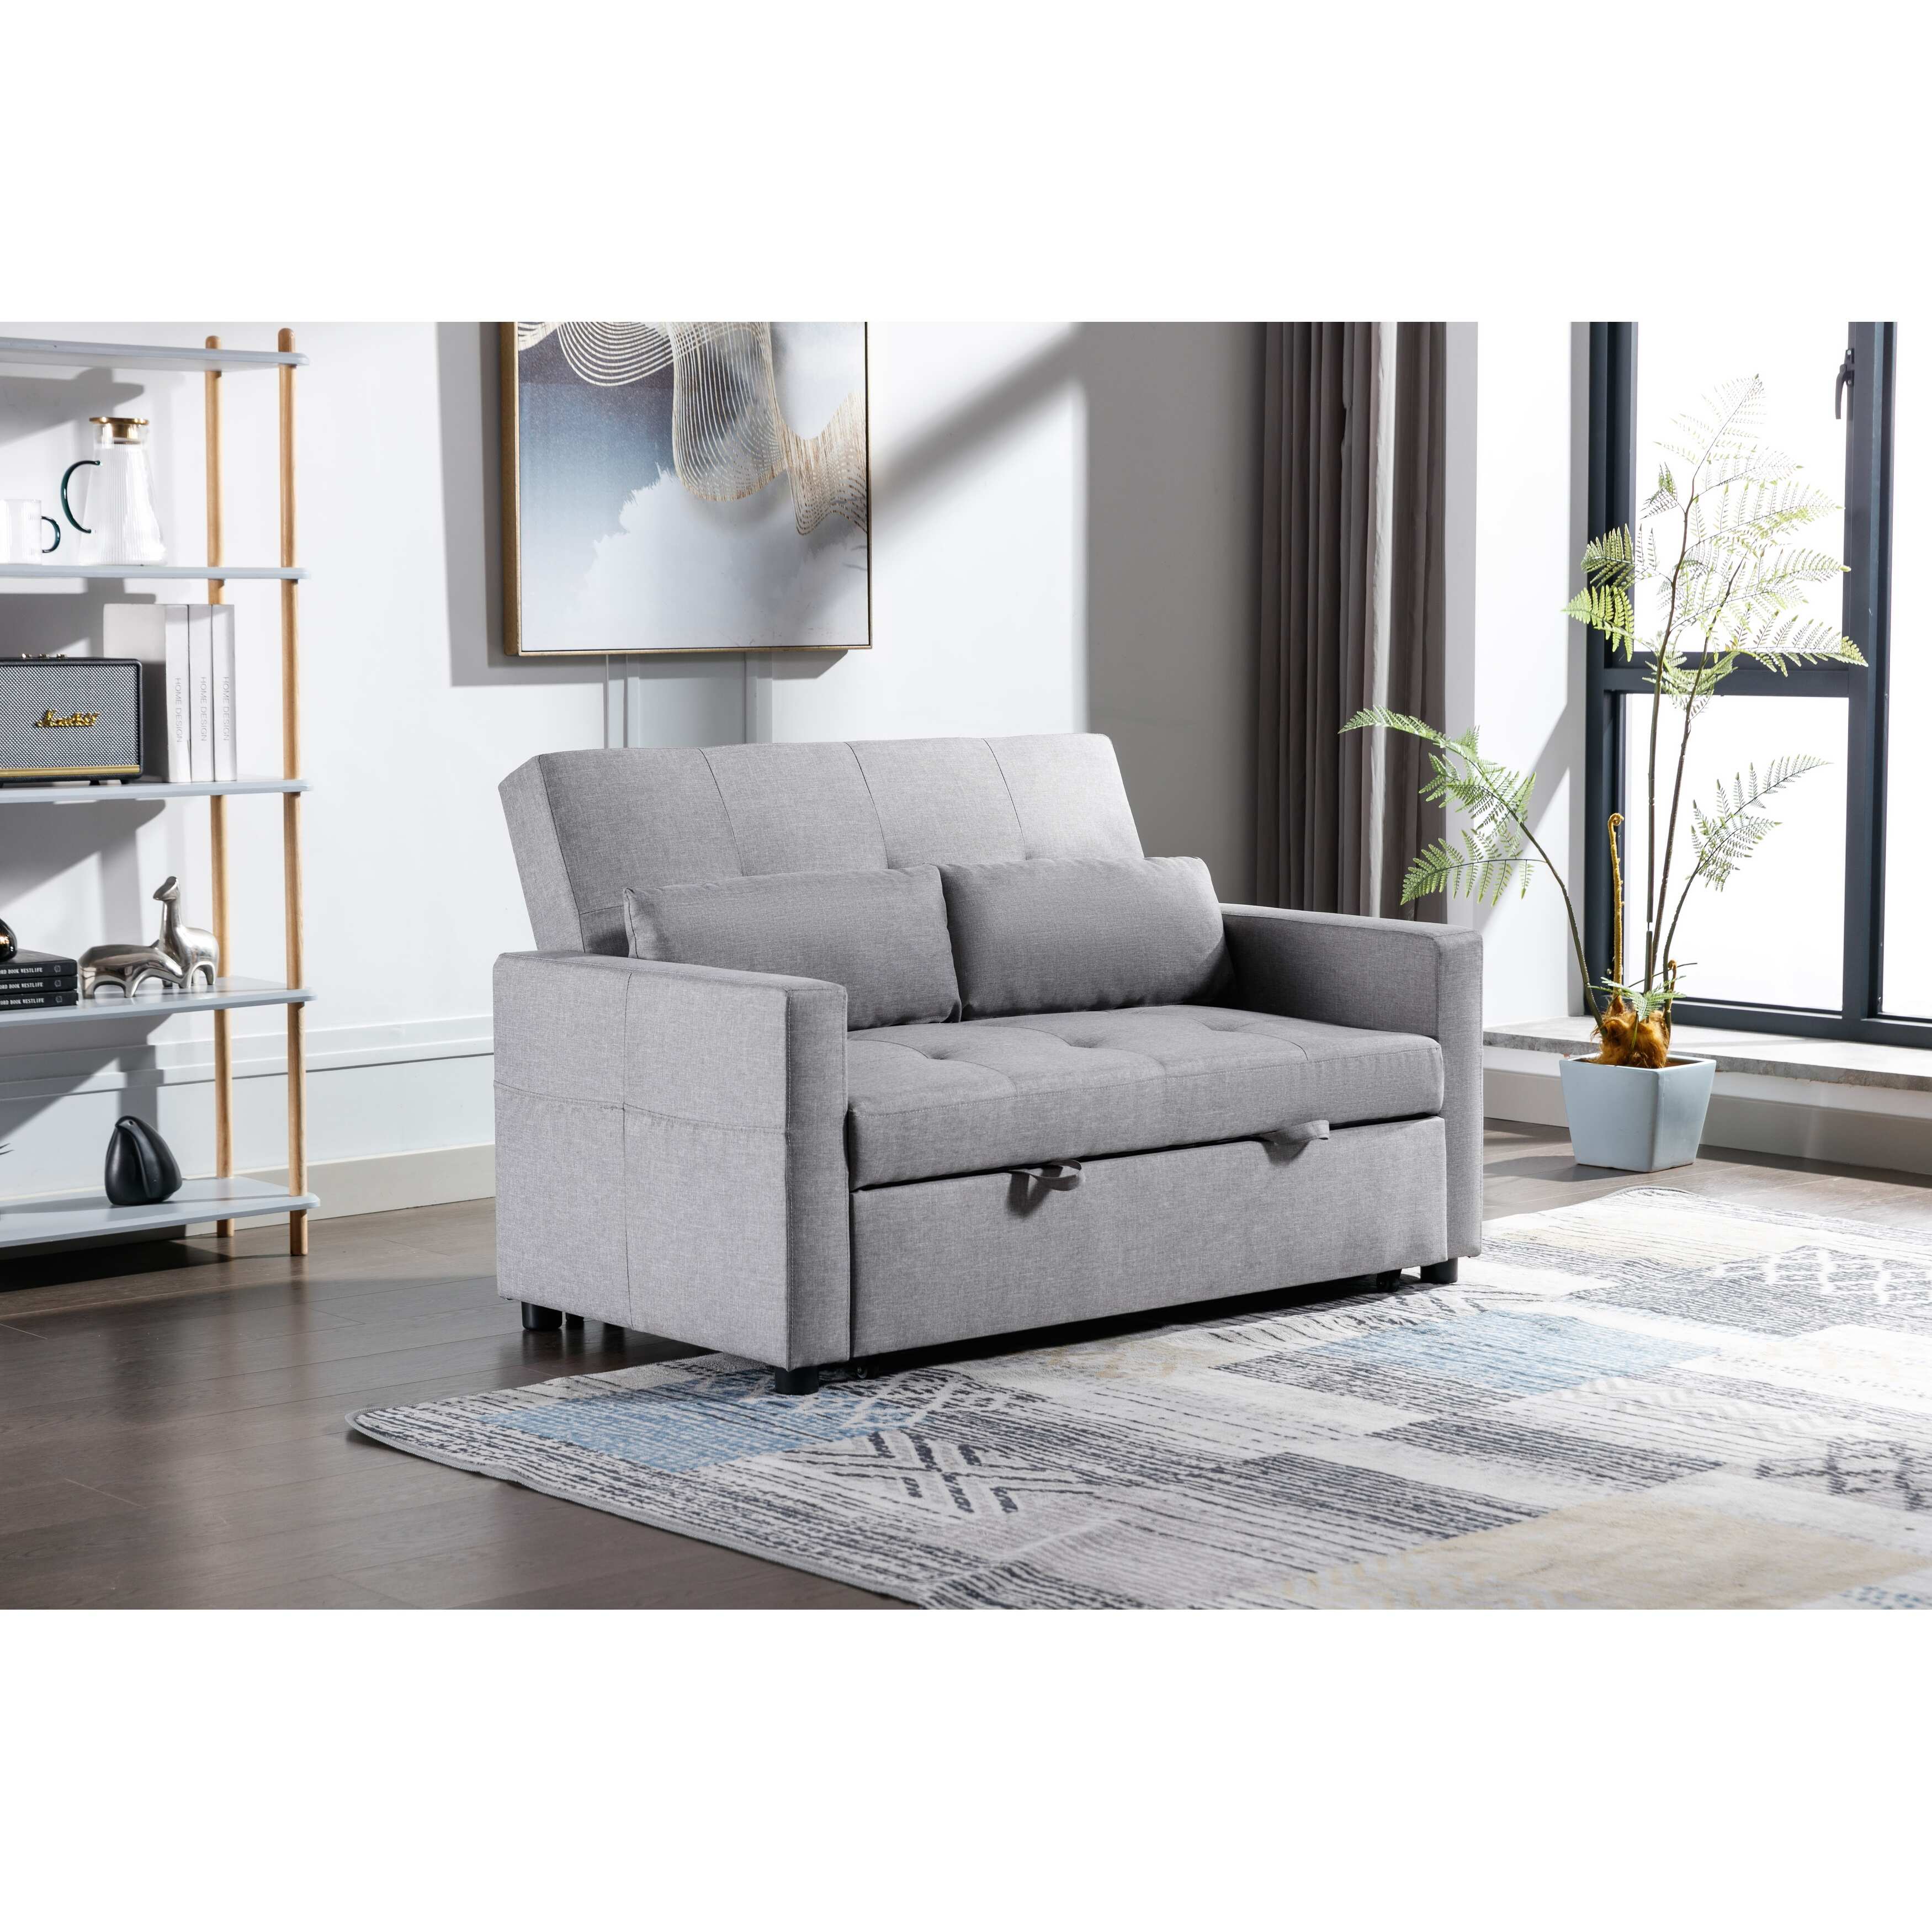 3-in-1 Convertible Slepper Sofa Pull Out Sleeper Loveseat w/Pillow